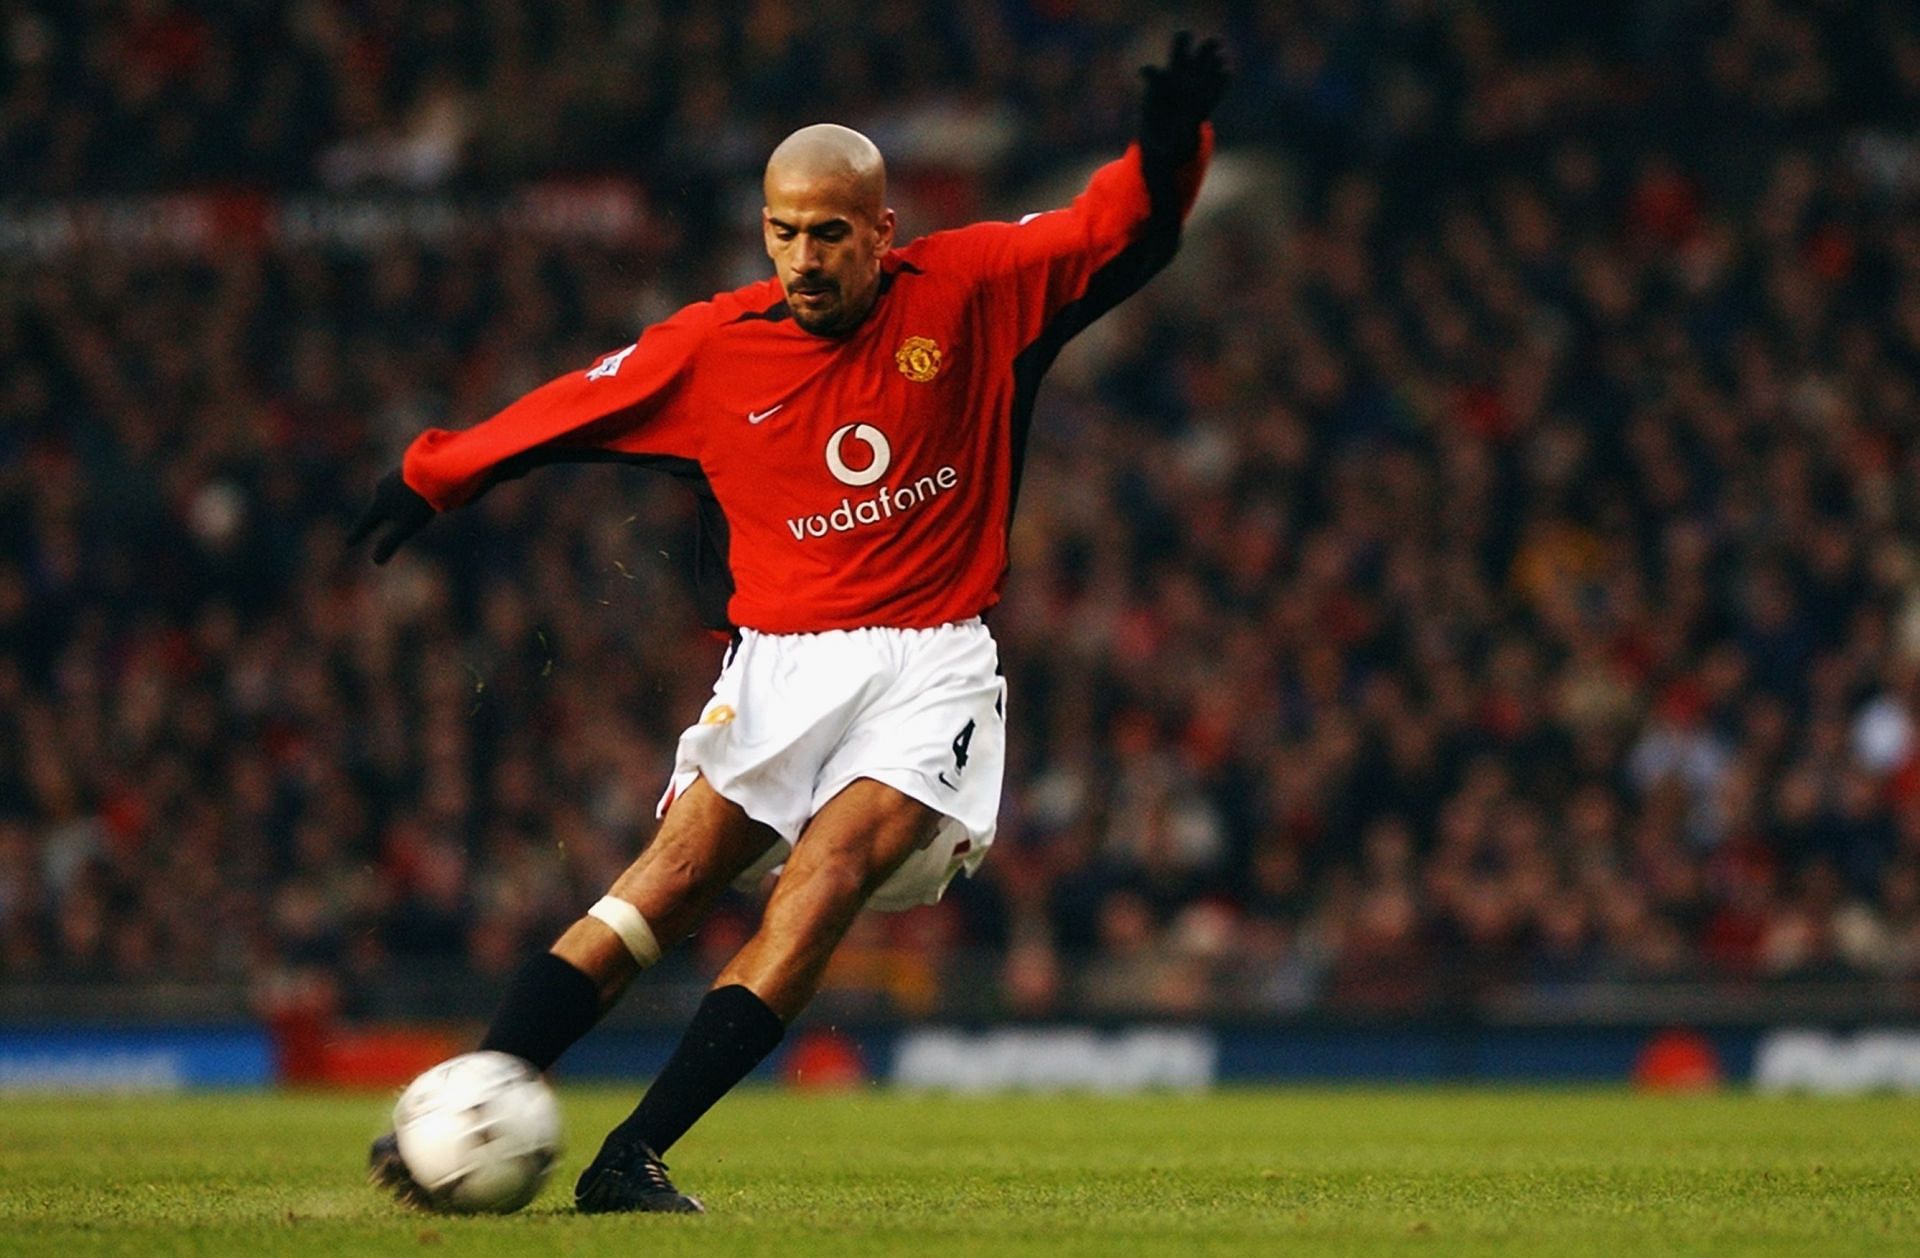 Veron in action for United